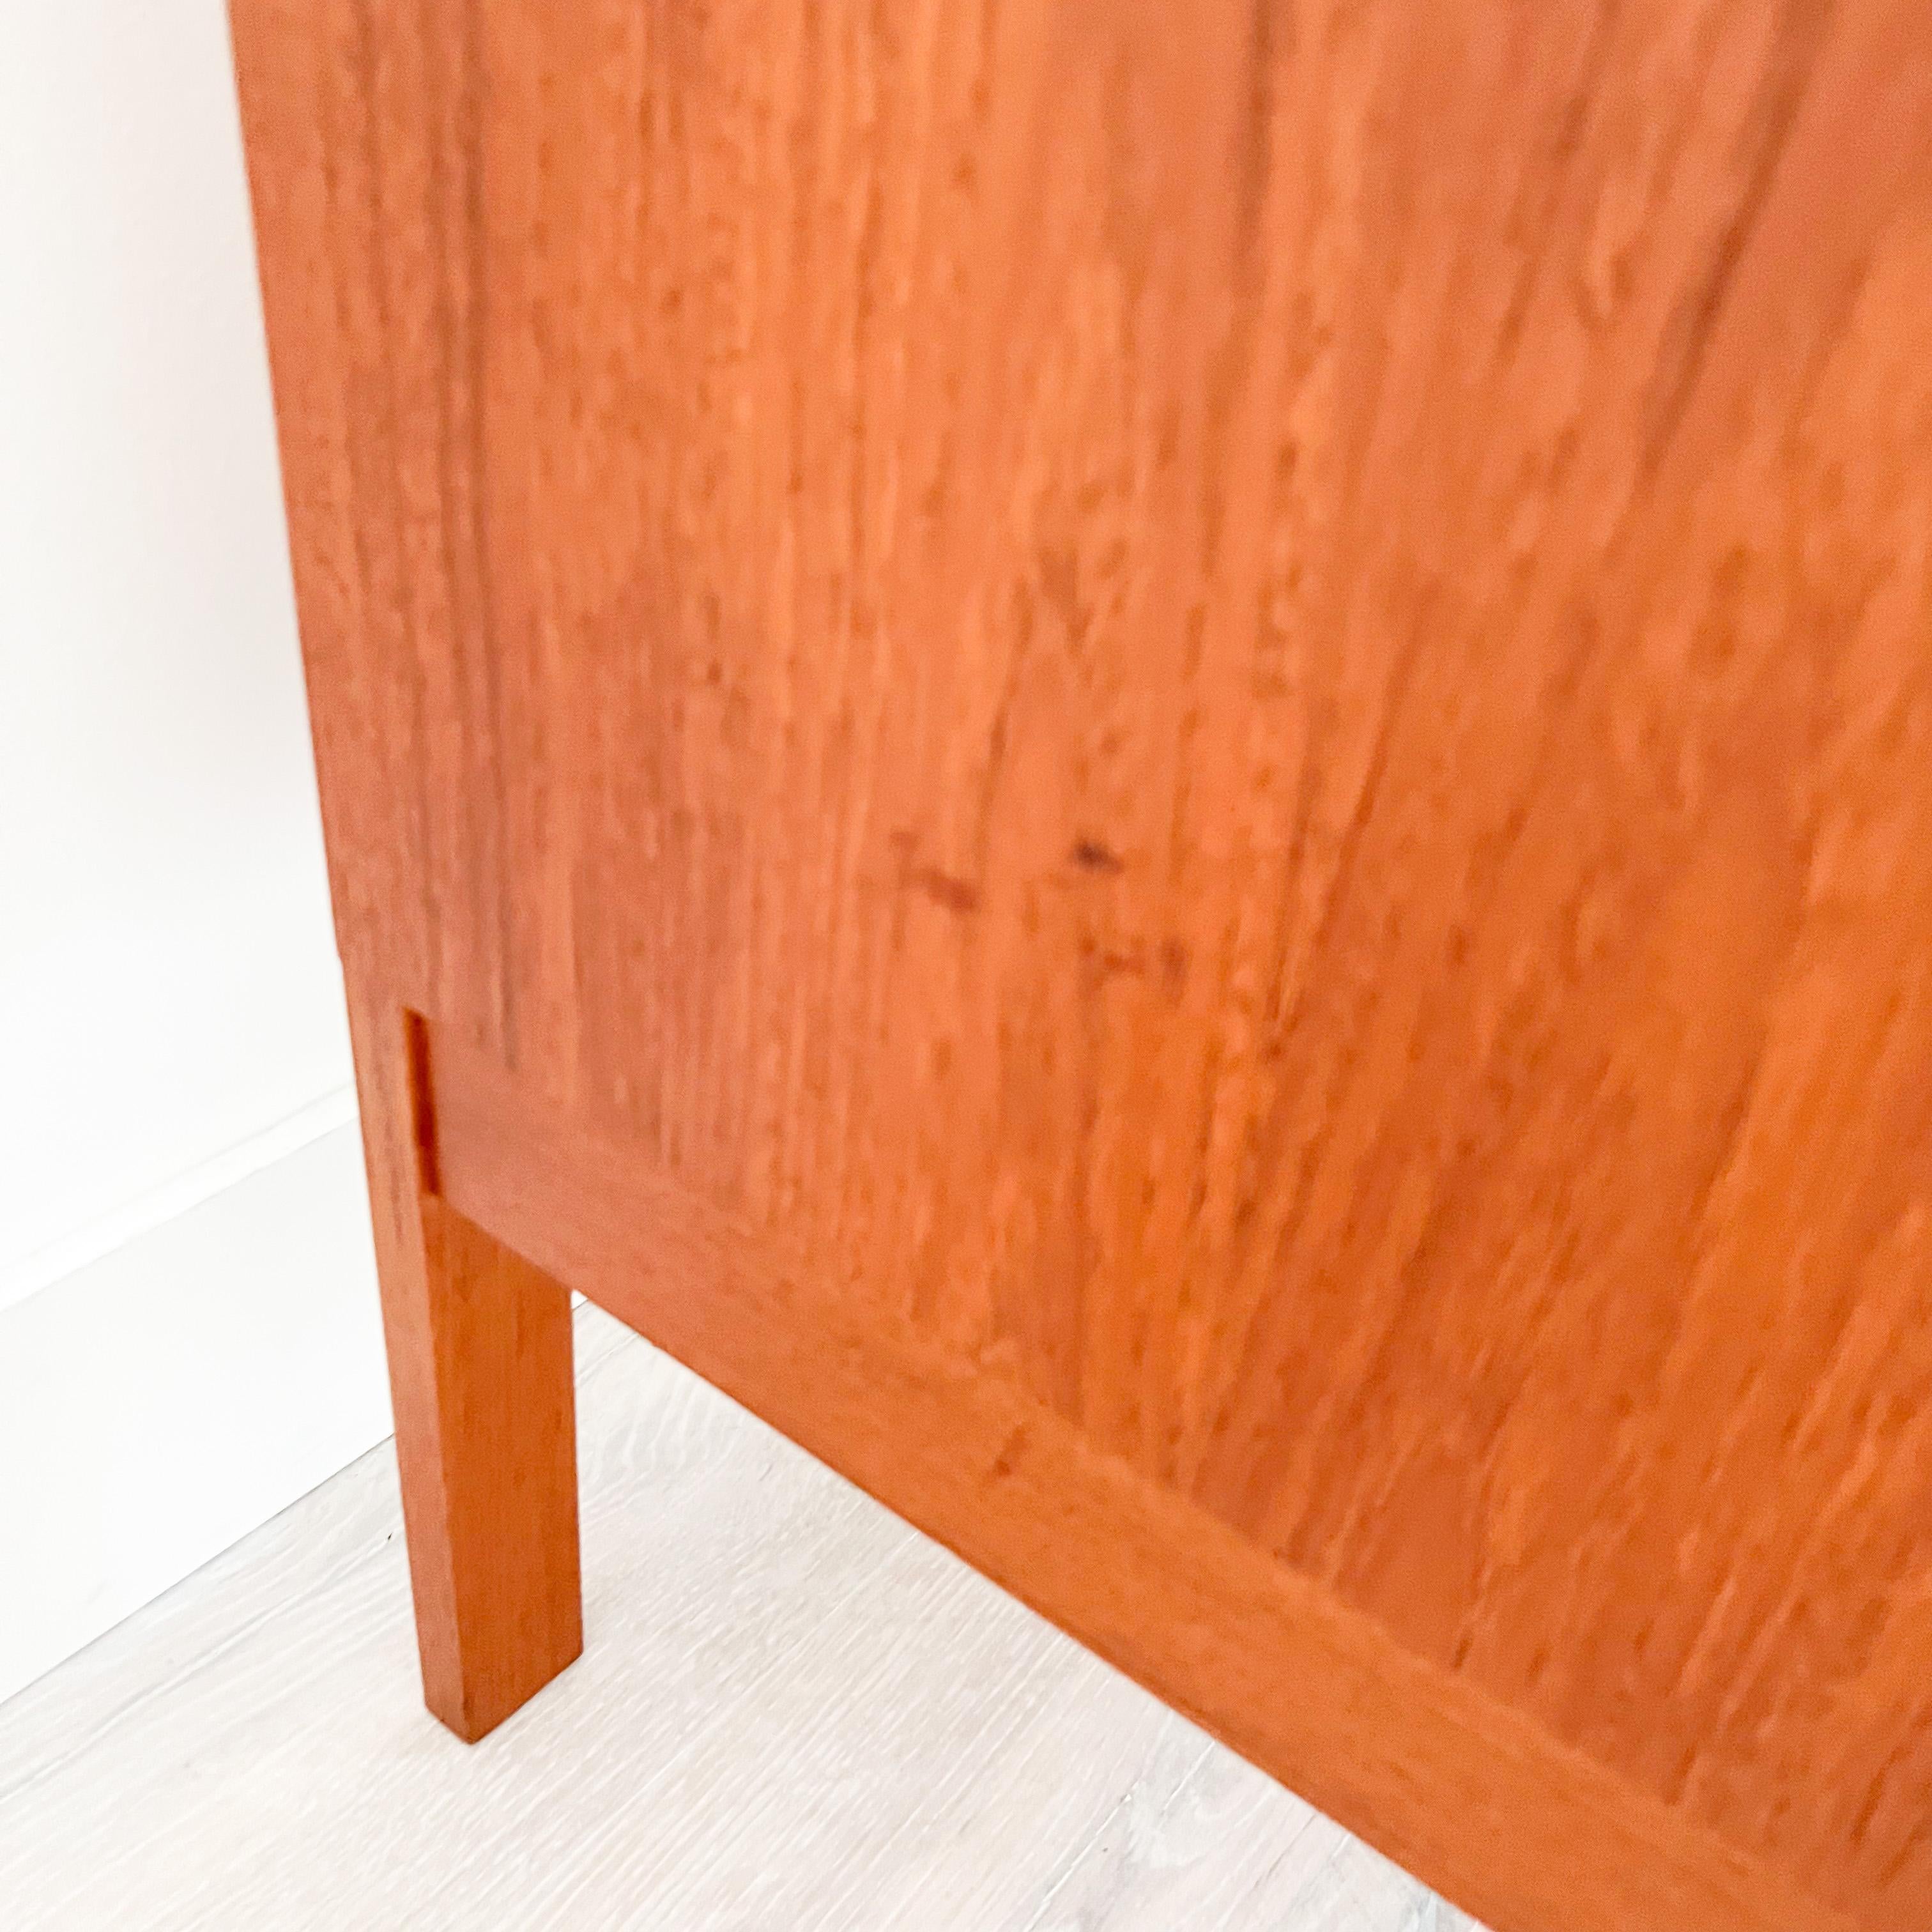 Mid century modern danish teak low 6 drawer dresser with inset sculpted drawer pulls by Nils Jonsson. The original finish is in good condition with minor surface scuffing and scratching. The drawers open and close with ease.